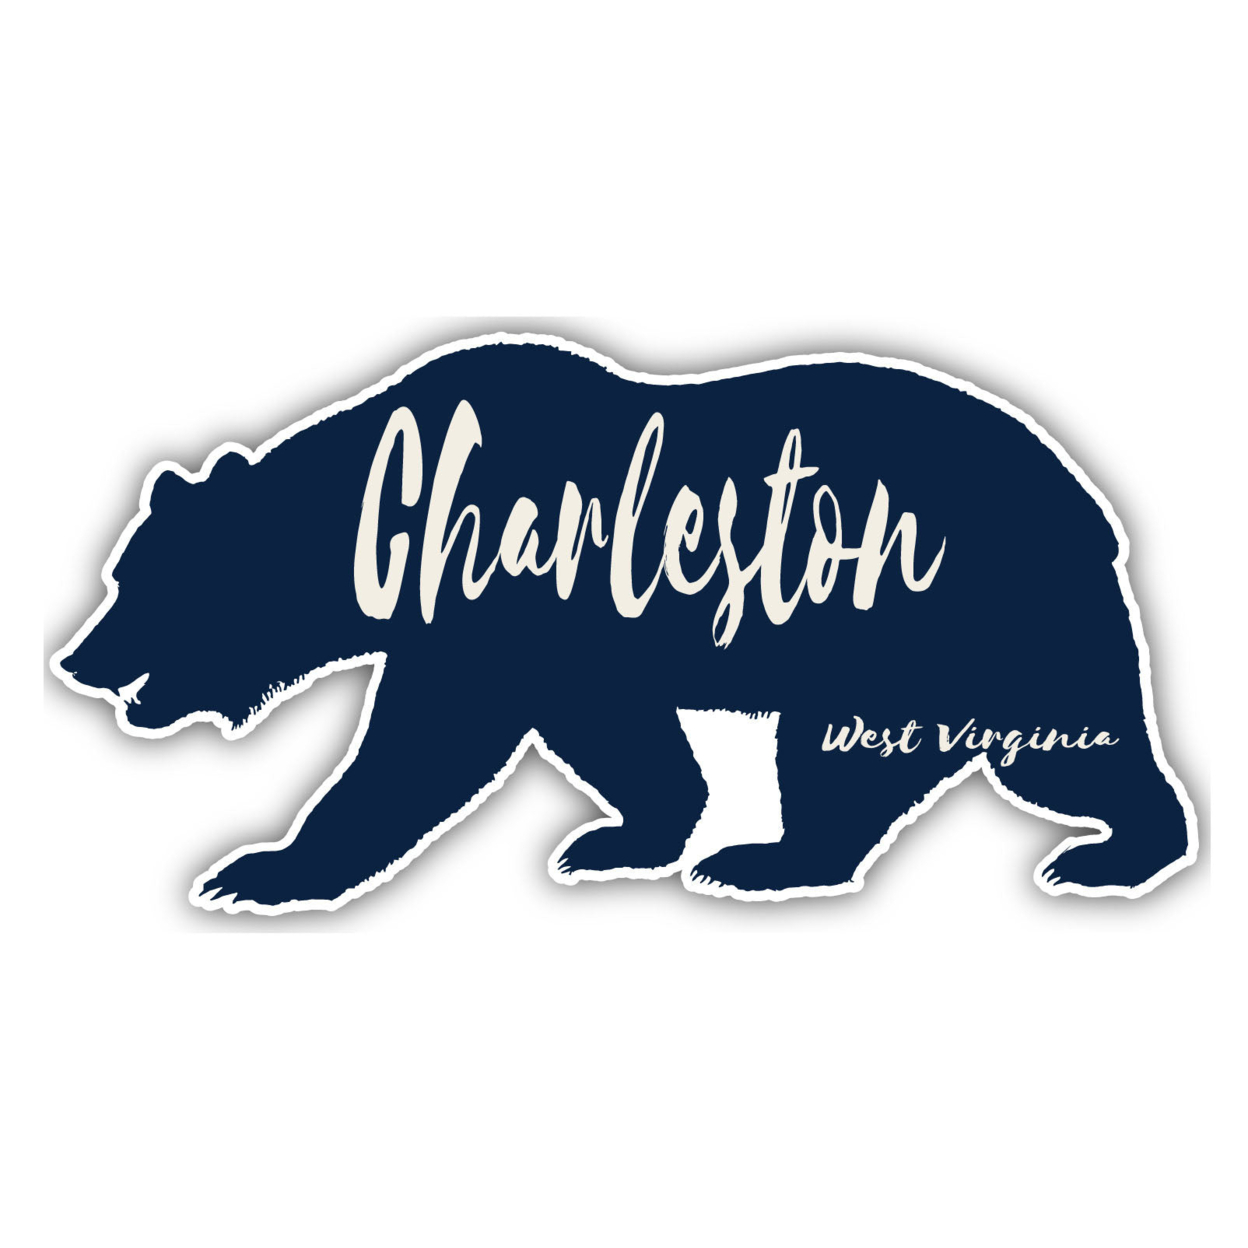 Charleston West Virginia Souvenir Decorative Stickers (Choose Theme And Size) - 4-Pack, 6-Inch, Tent